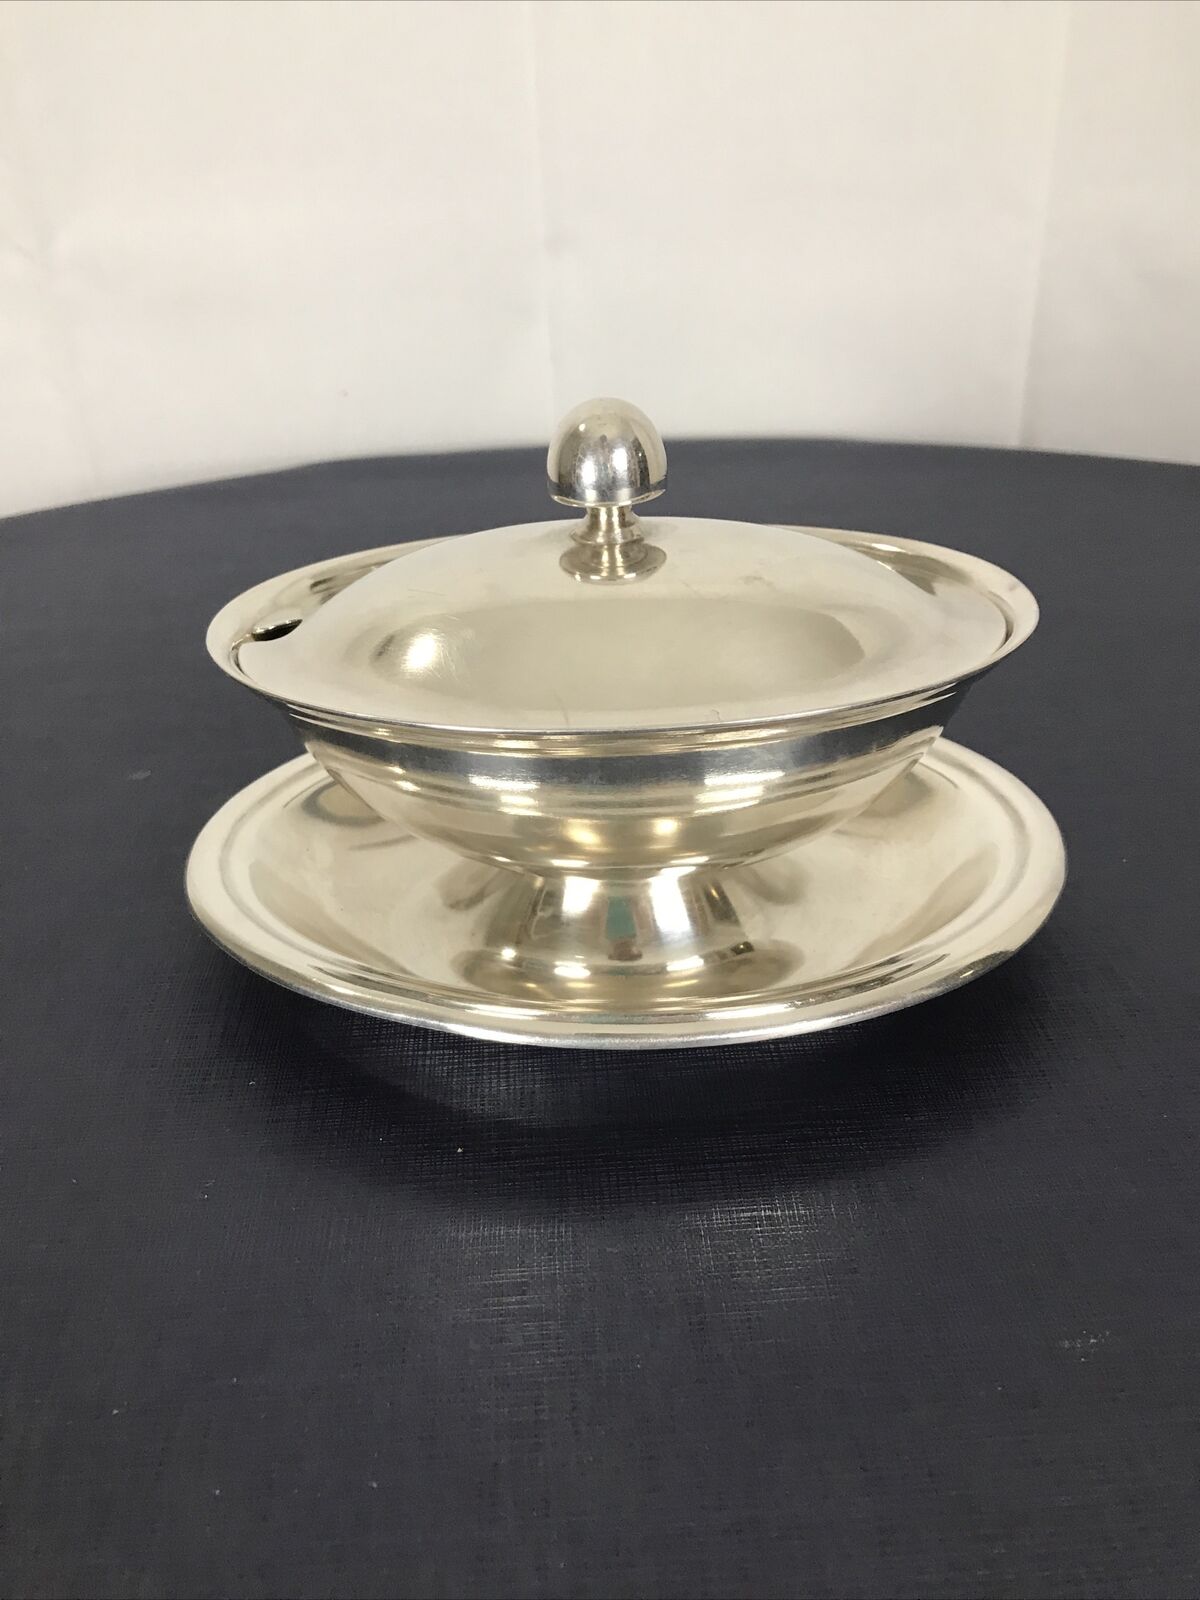 WWII USN 1930s-40s Reed & Barton Silver Plated Gravy Dish Lid Tureen Navy 3610